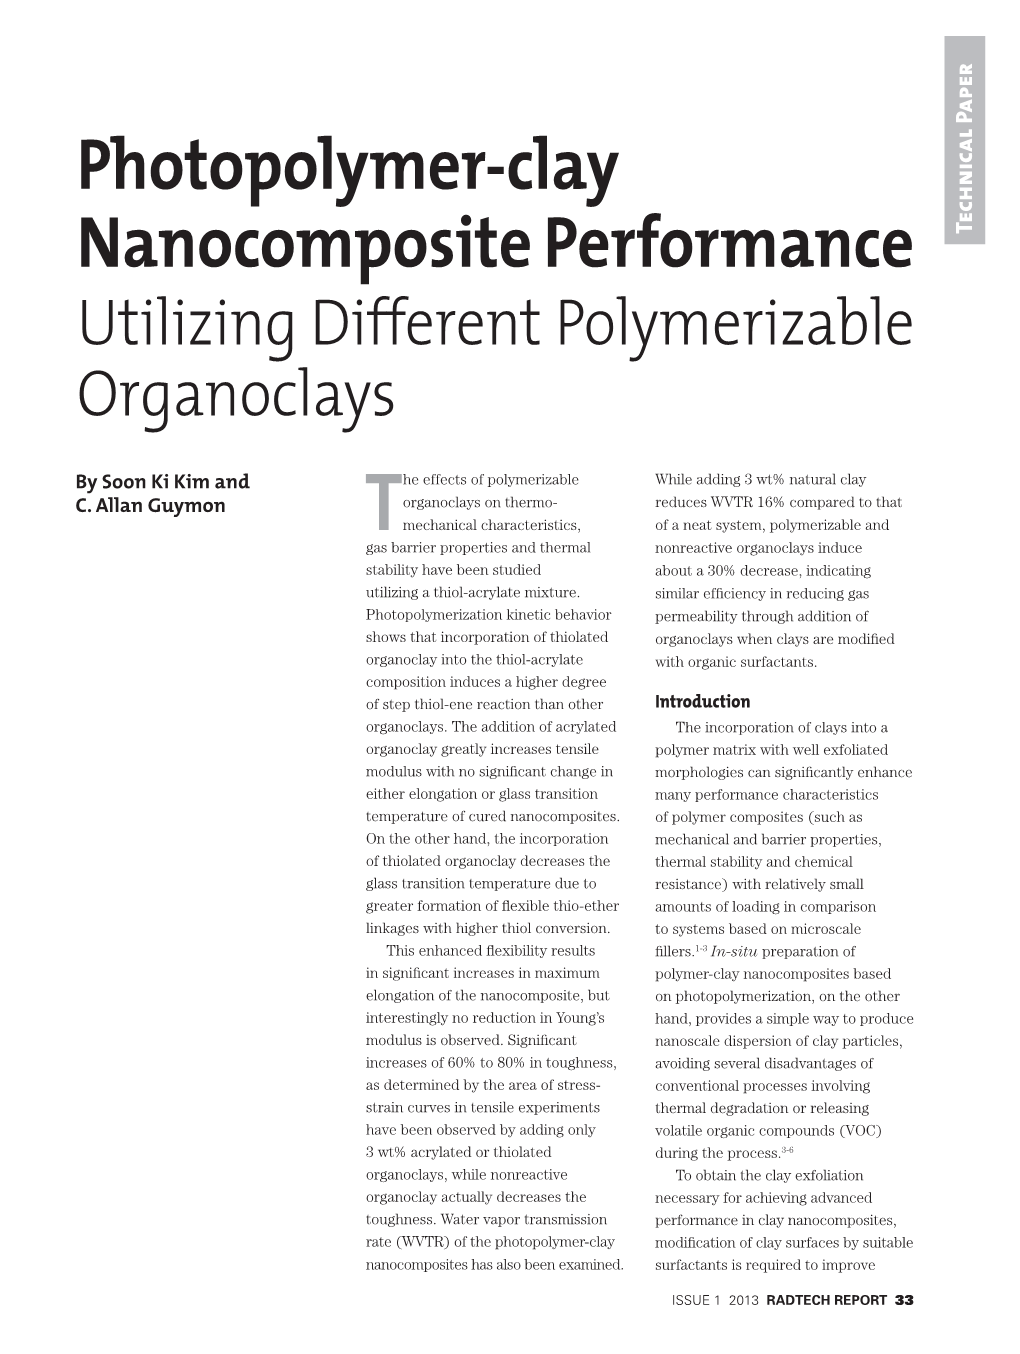 Photopolymer-Clay Nanocomposite Performance Utilizing Different Polymerizable Organoclays